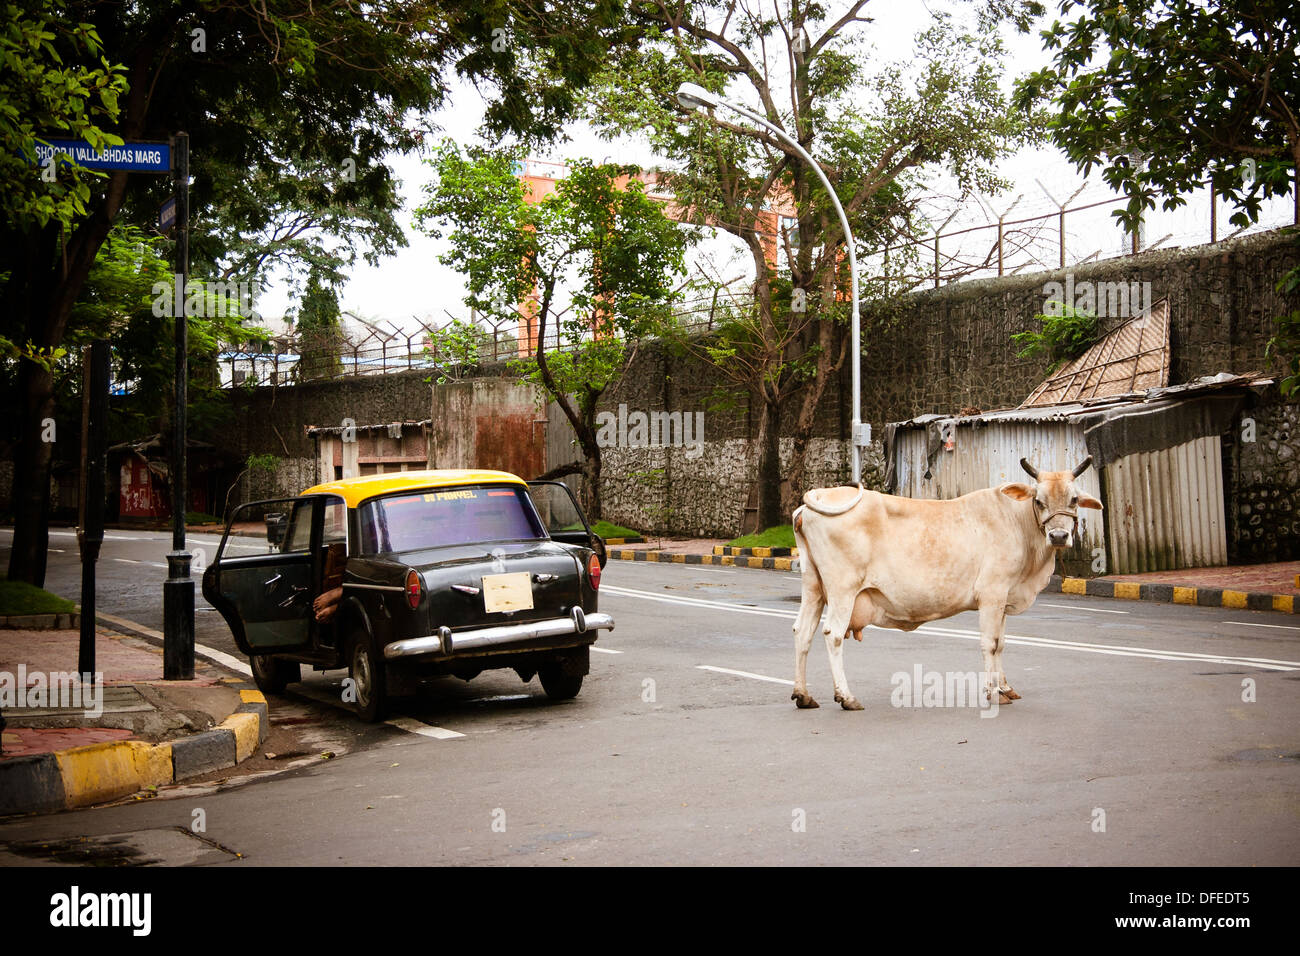 A cow stands next to a taxi in a Mumbai street in India Stock Photo